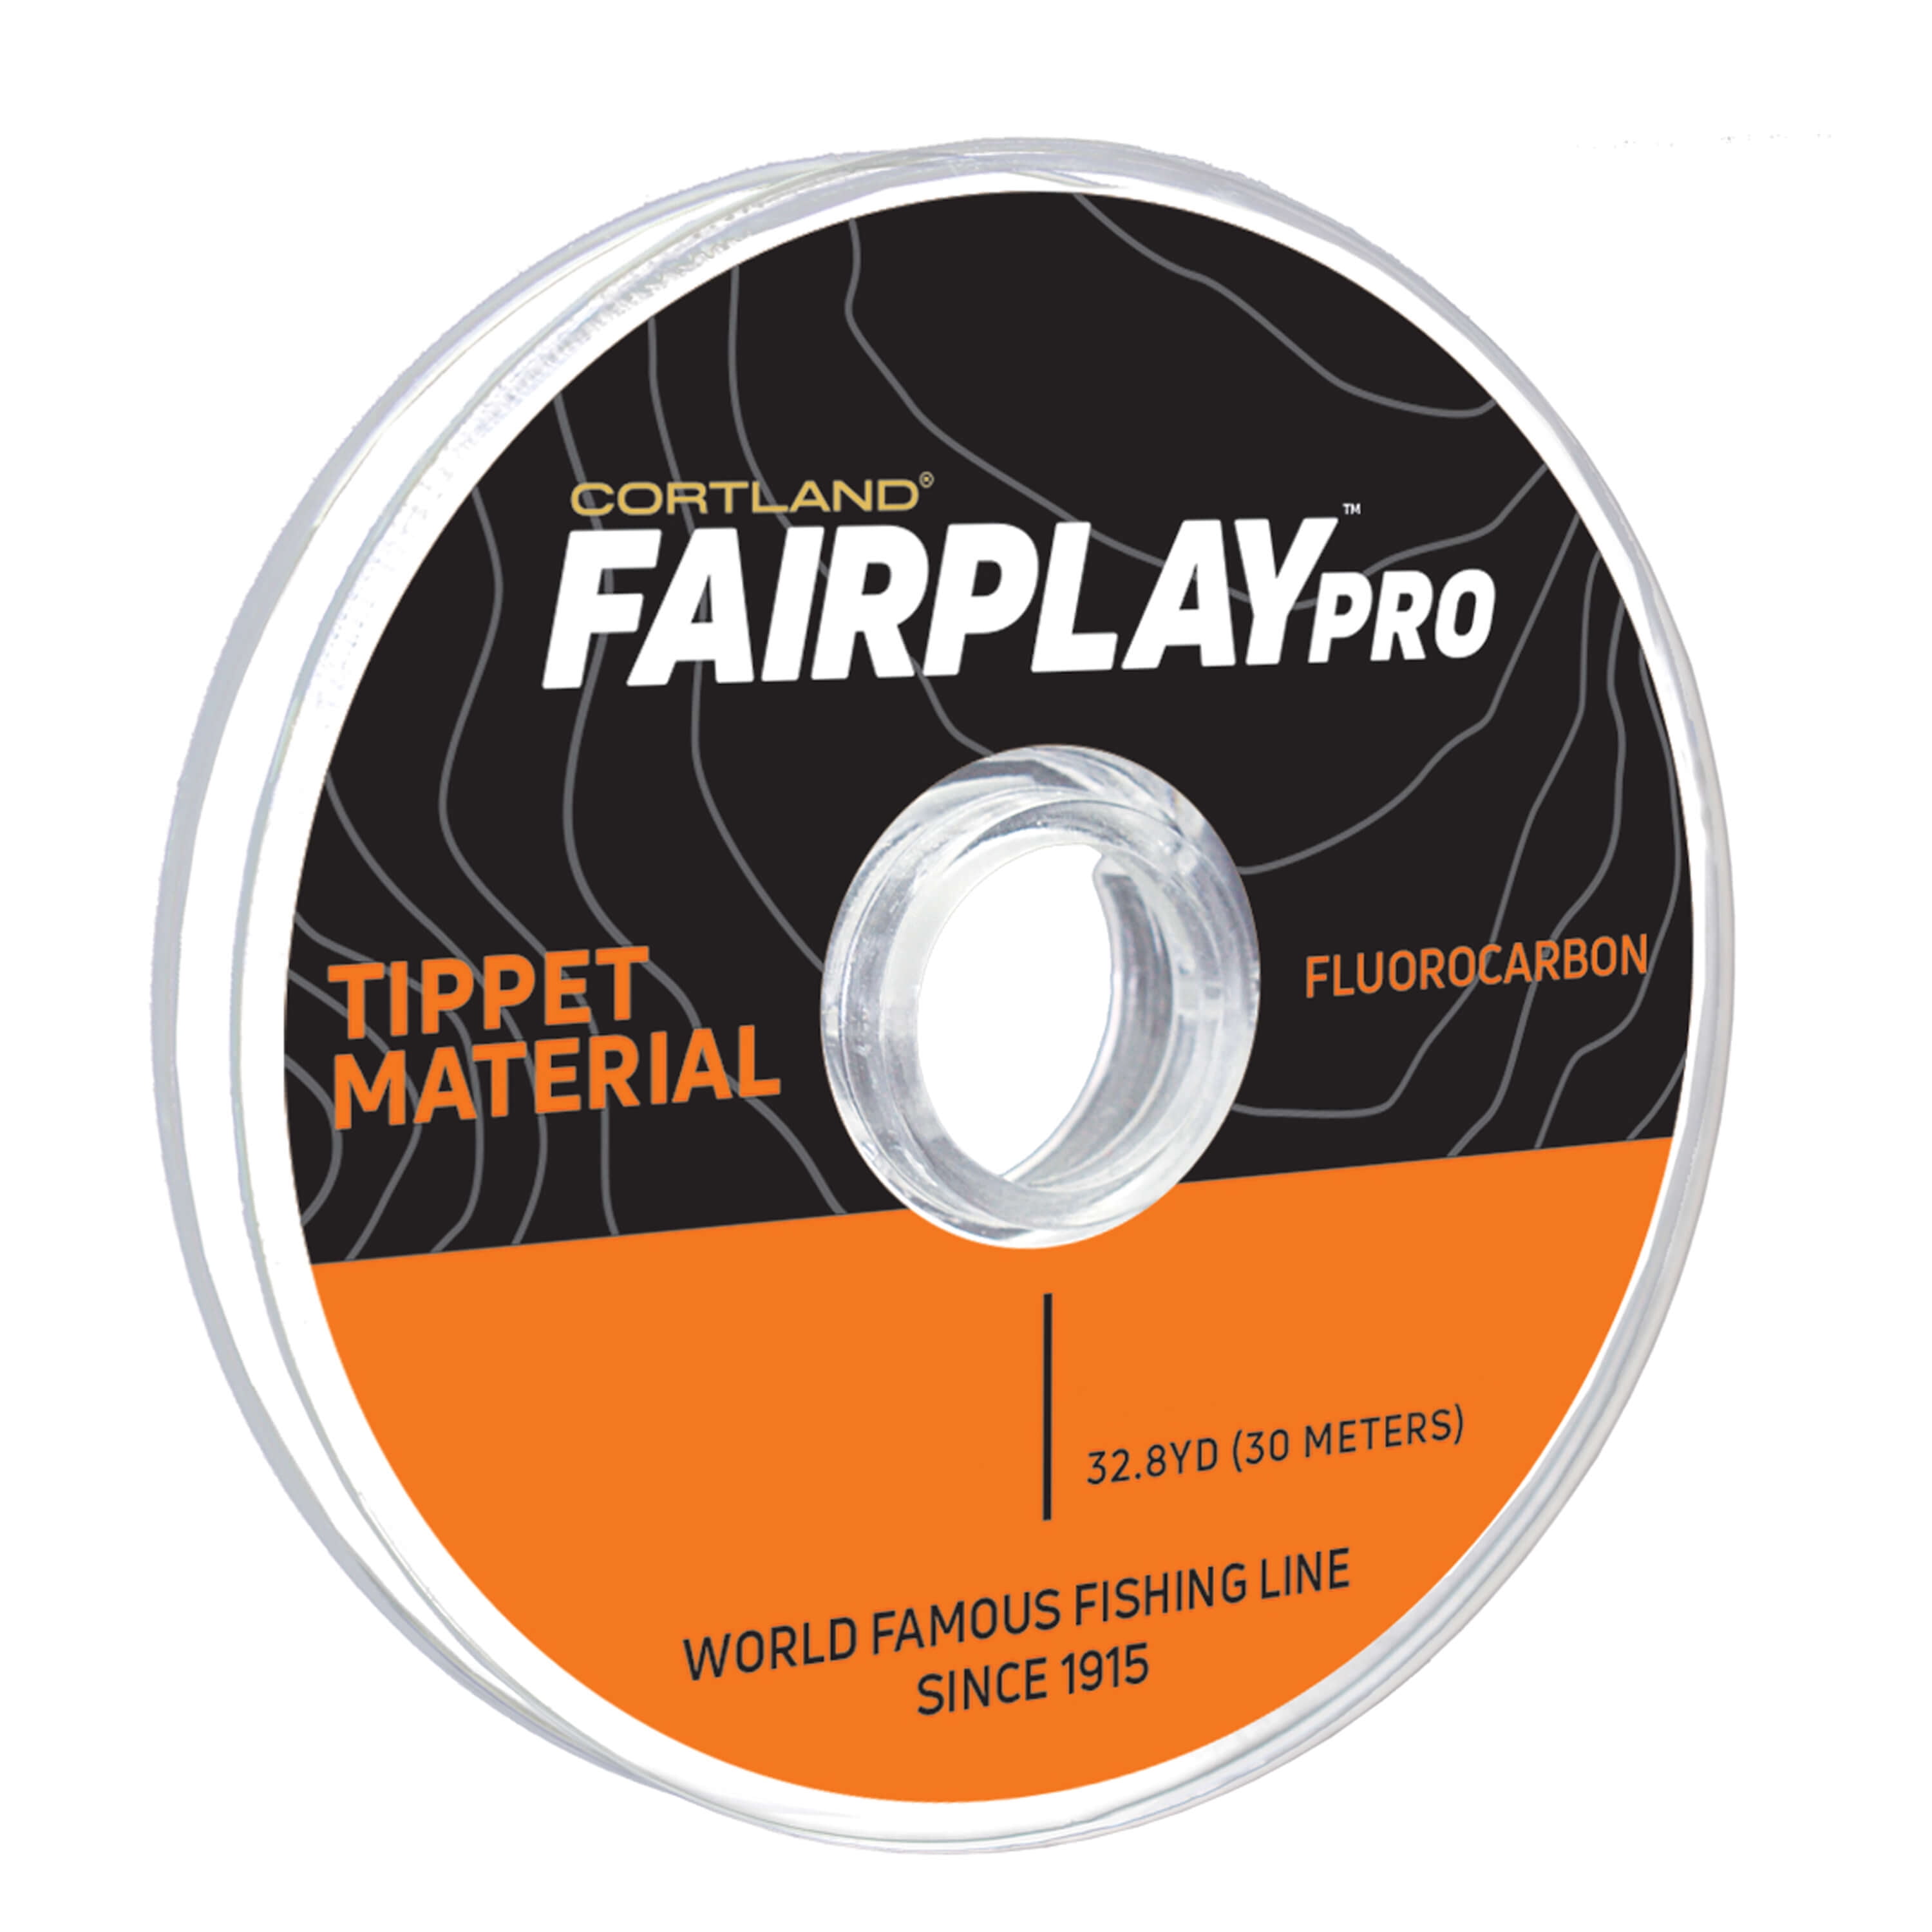 Cortland 4X Fairplay Pro Fluorocarbon Tippet, 32 yd, Size: Assorted